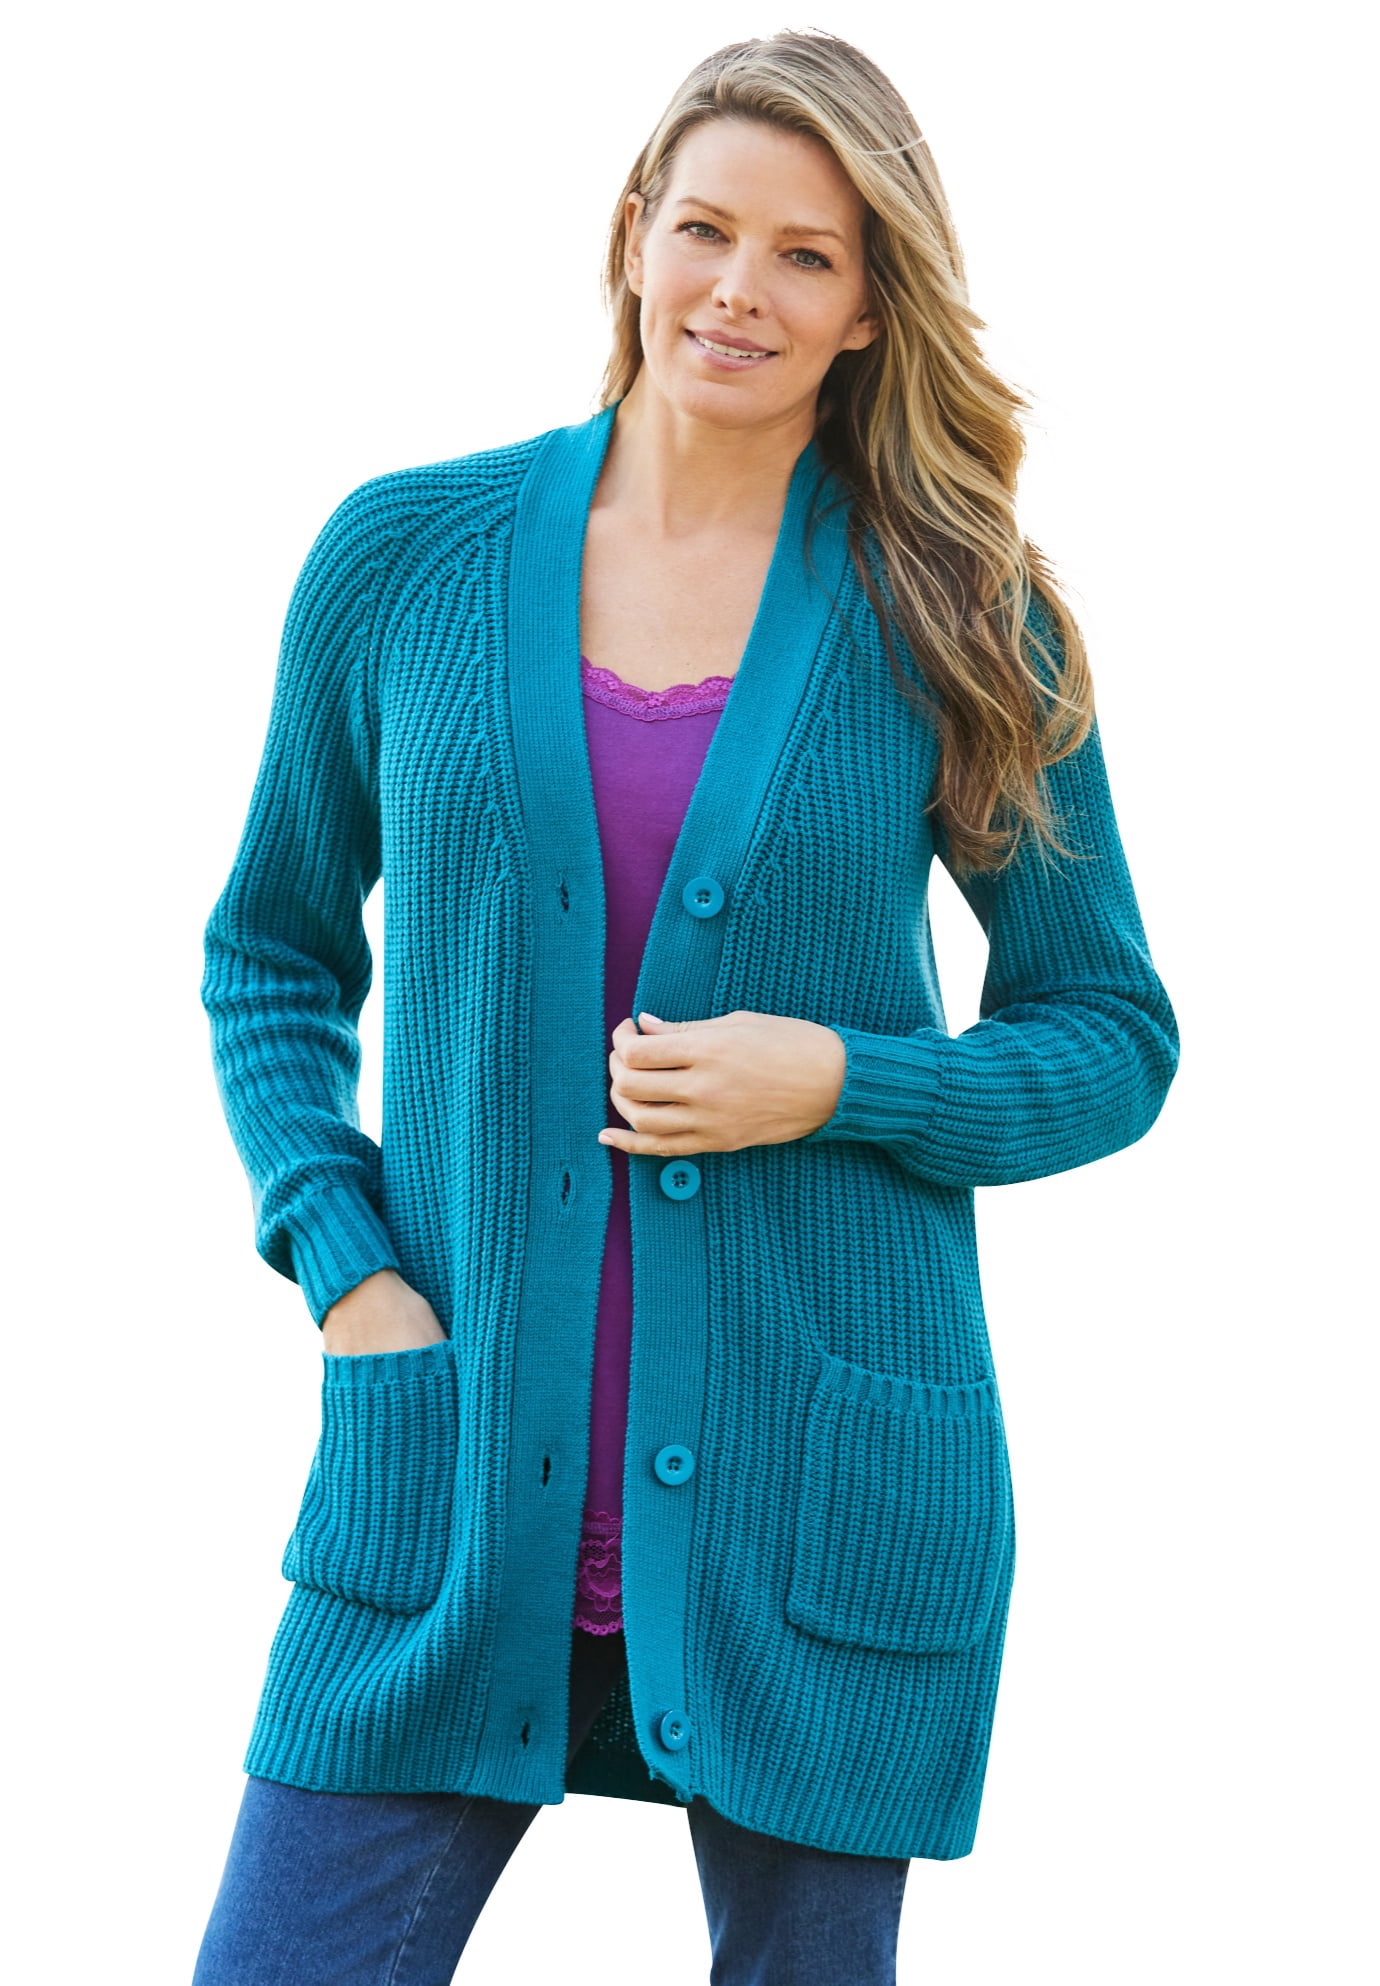 Woman Within Woman Within Women S Plus Size Long Sleeve Shaker Cardigan Sweater L Deep Teal